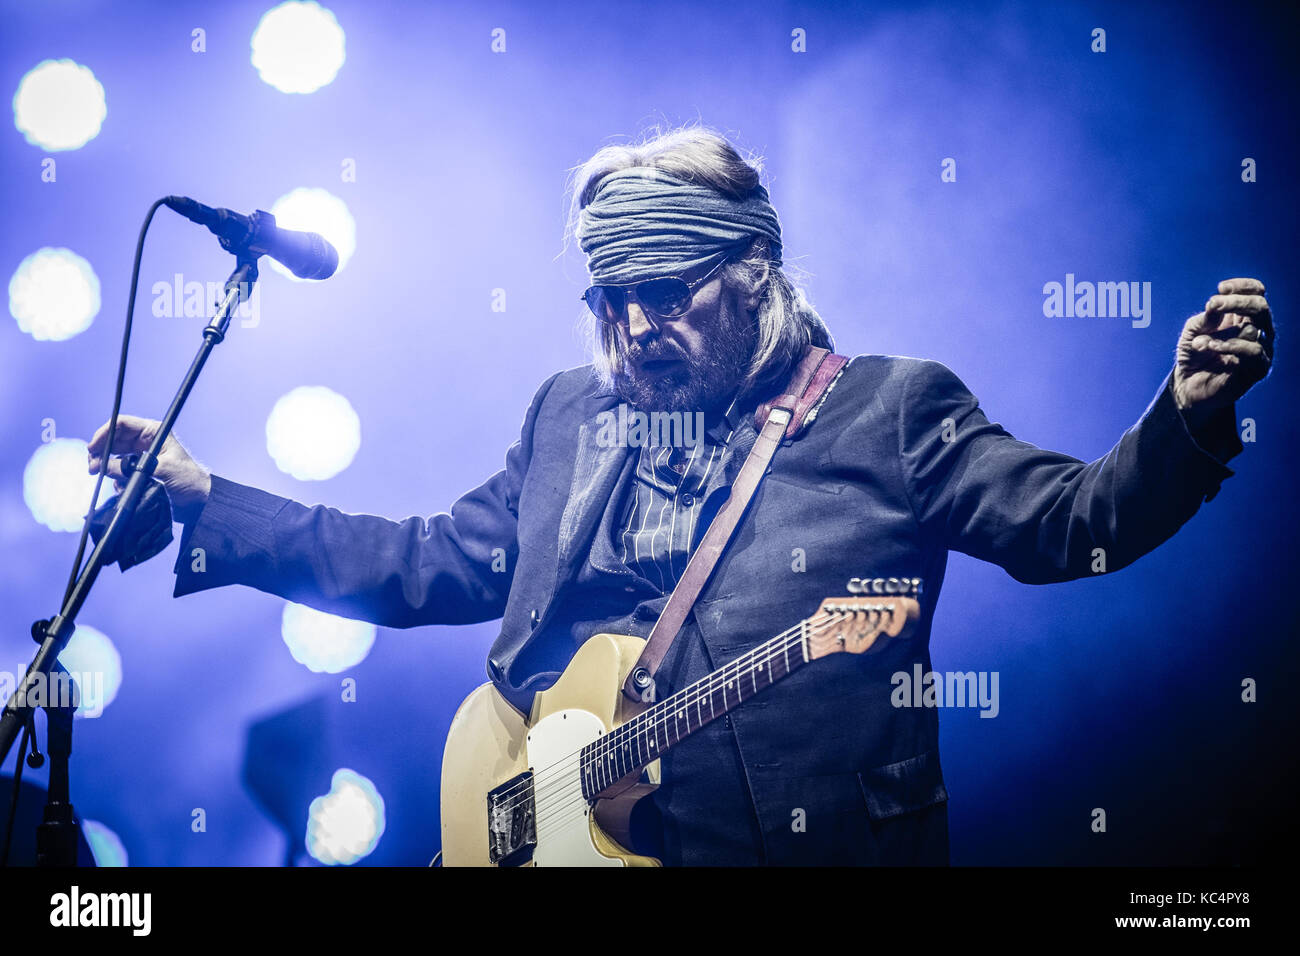 May 27, 2017. 27th May, 2017. Napa, California, USA - Tom Petty & The Heartbreakers perform live at BottleRock Festival. Credit: Jerome Brunet/ZUMA Wire/Alamy Live News Stock Photo